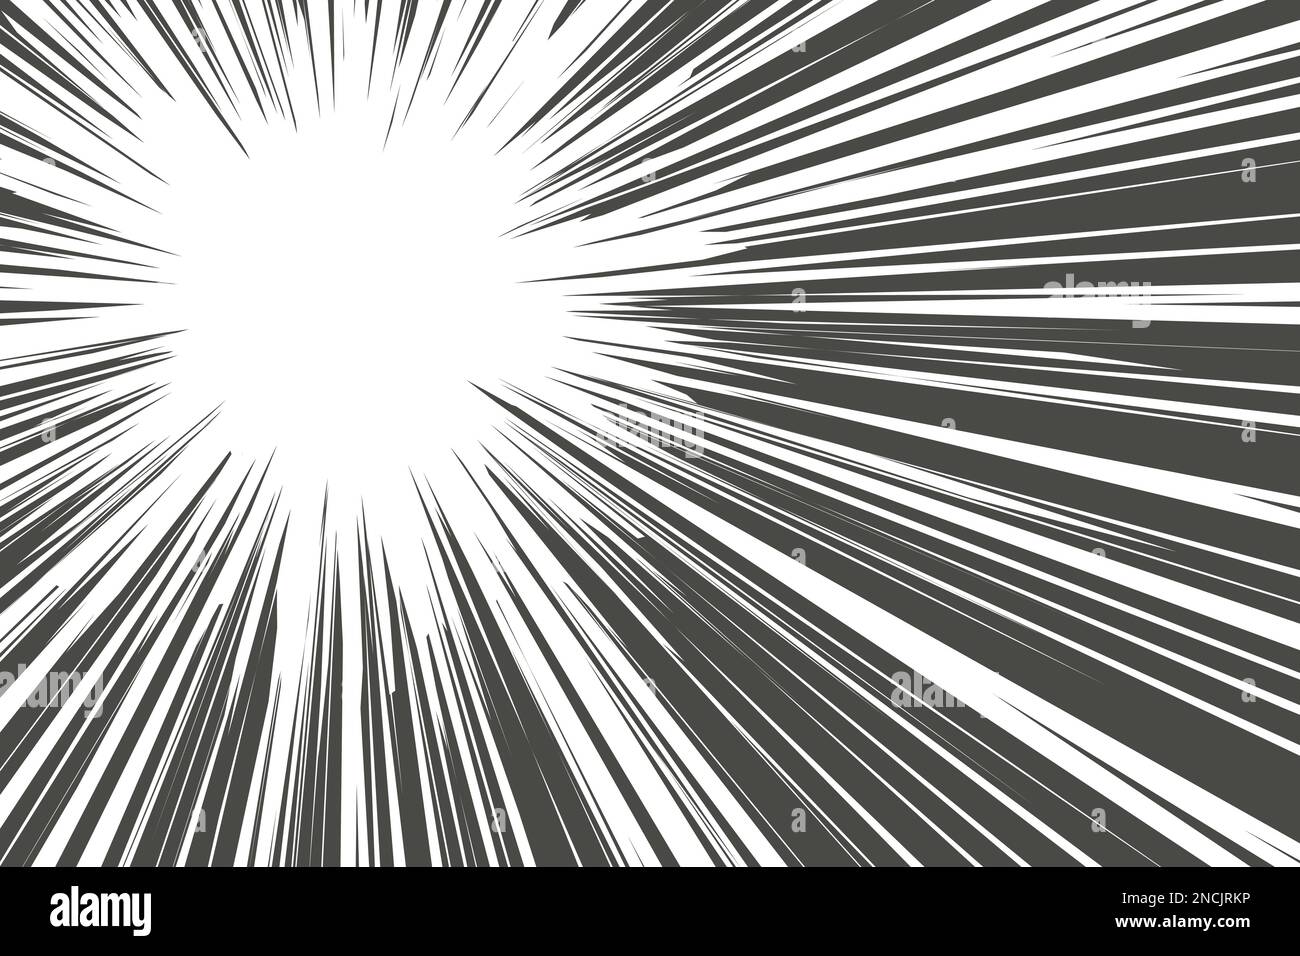 Radial motion speed lines for Manga comics or explosion drawing